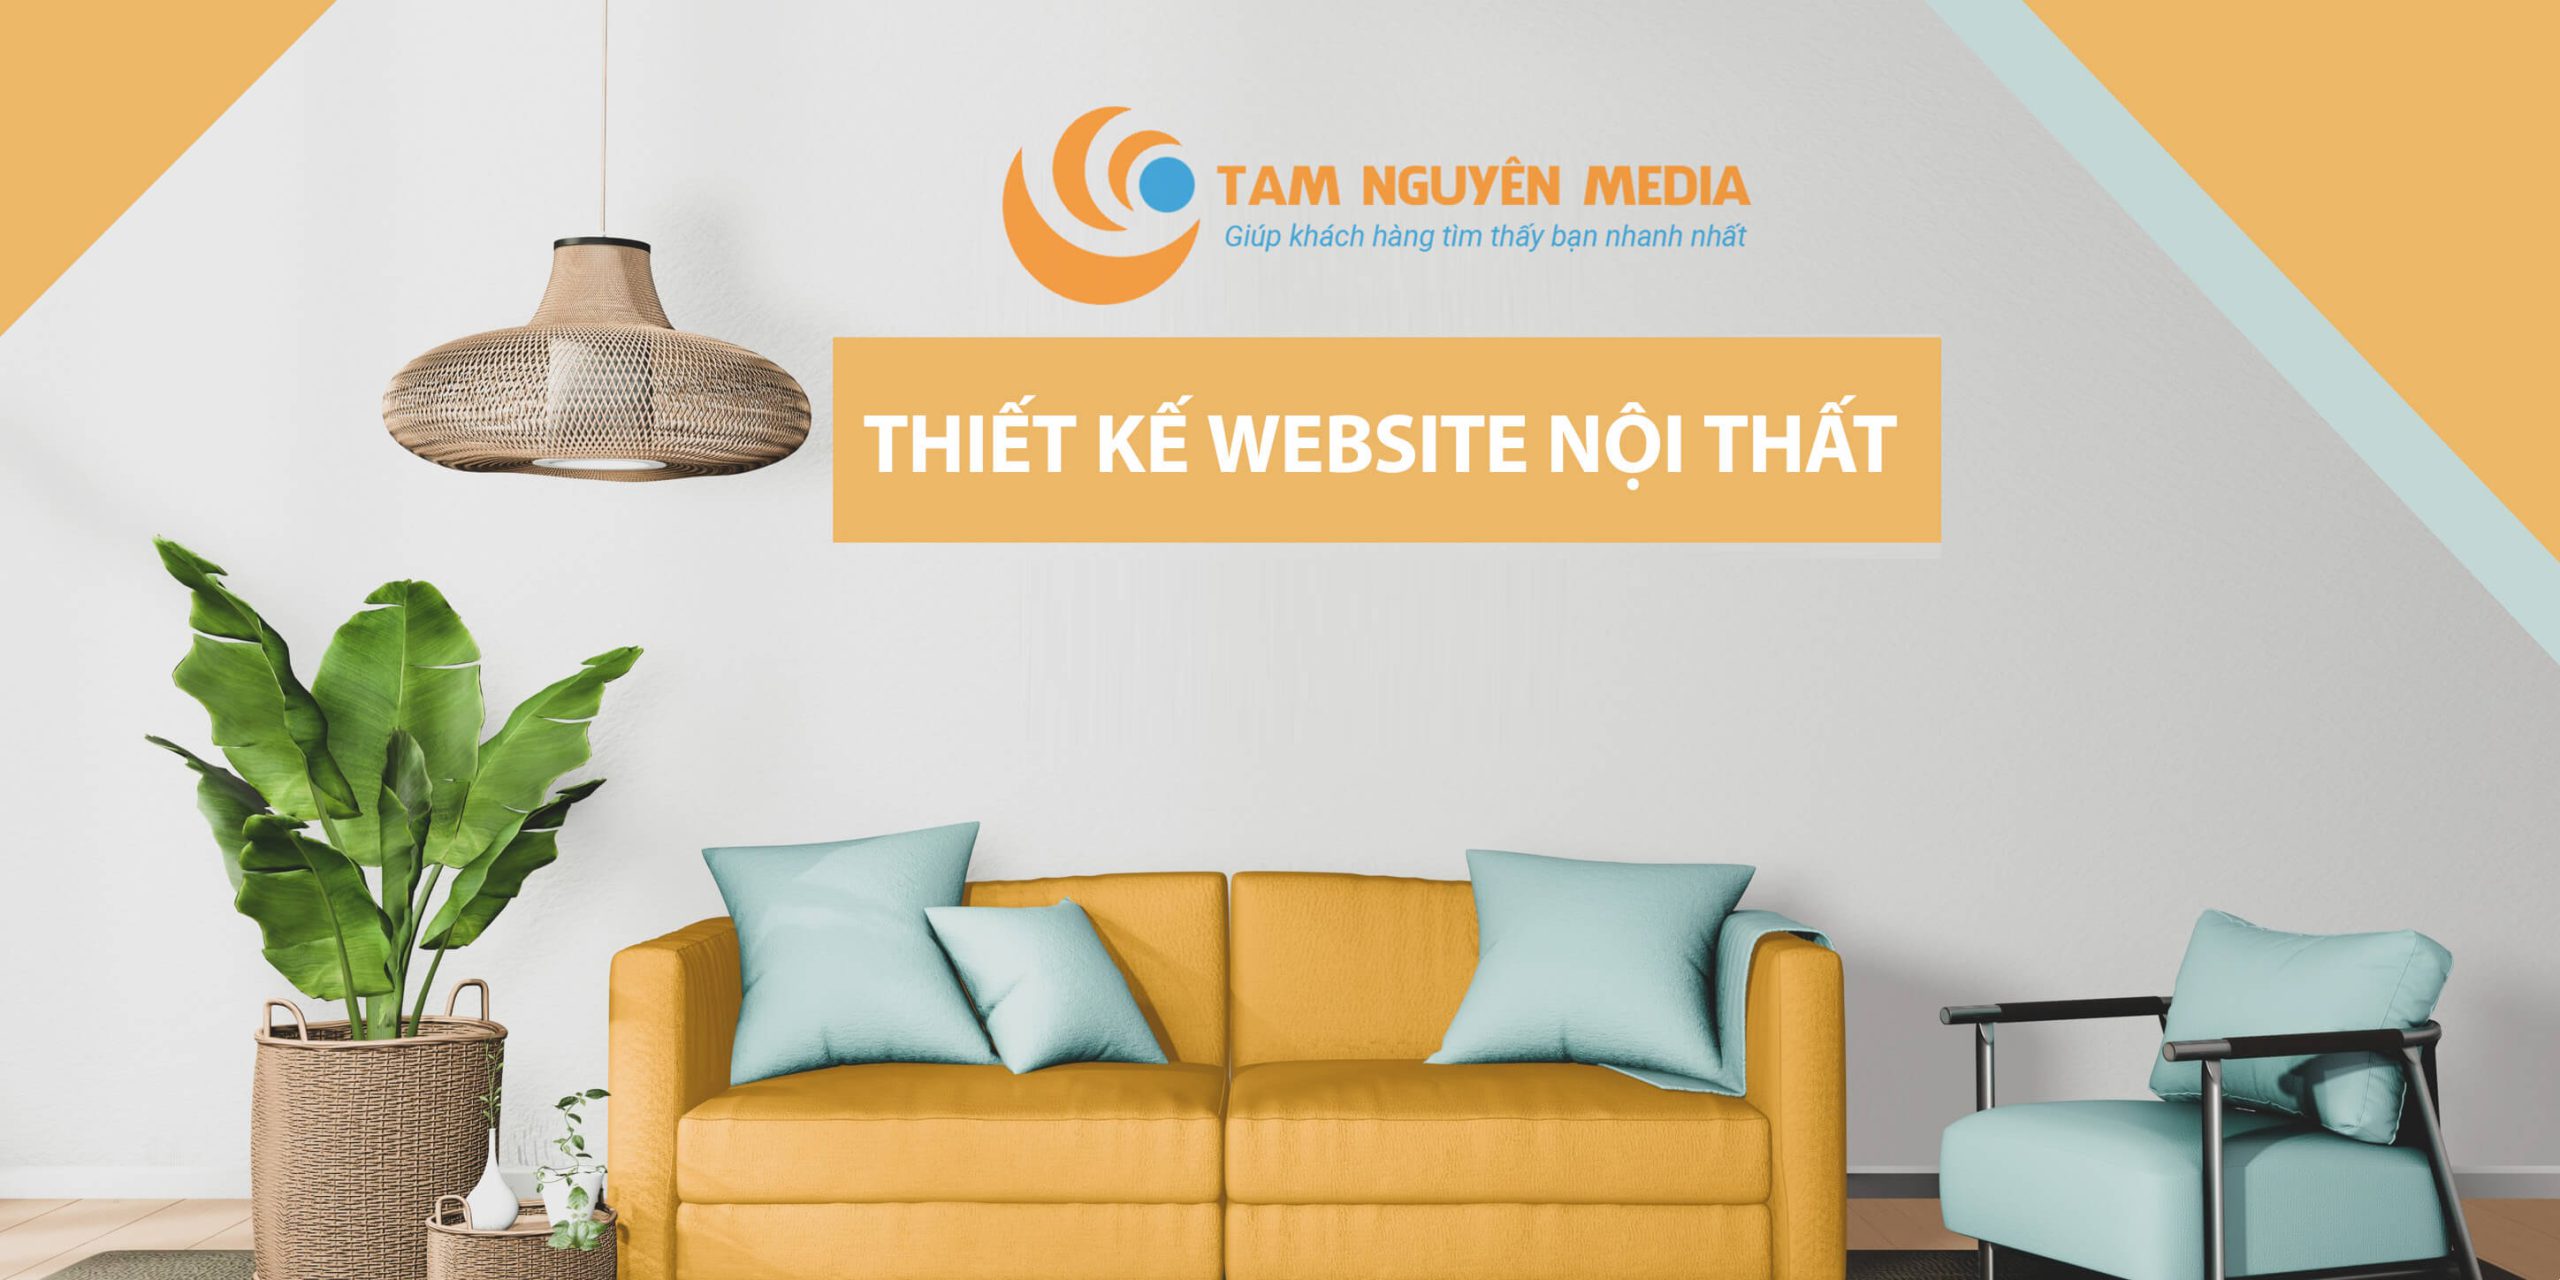 websitenoithat scaled - Công ty Thiết Kế Website Tam Nguyên